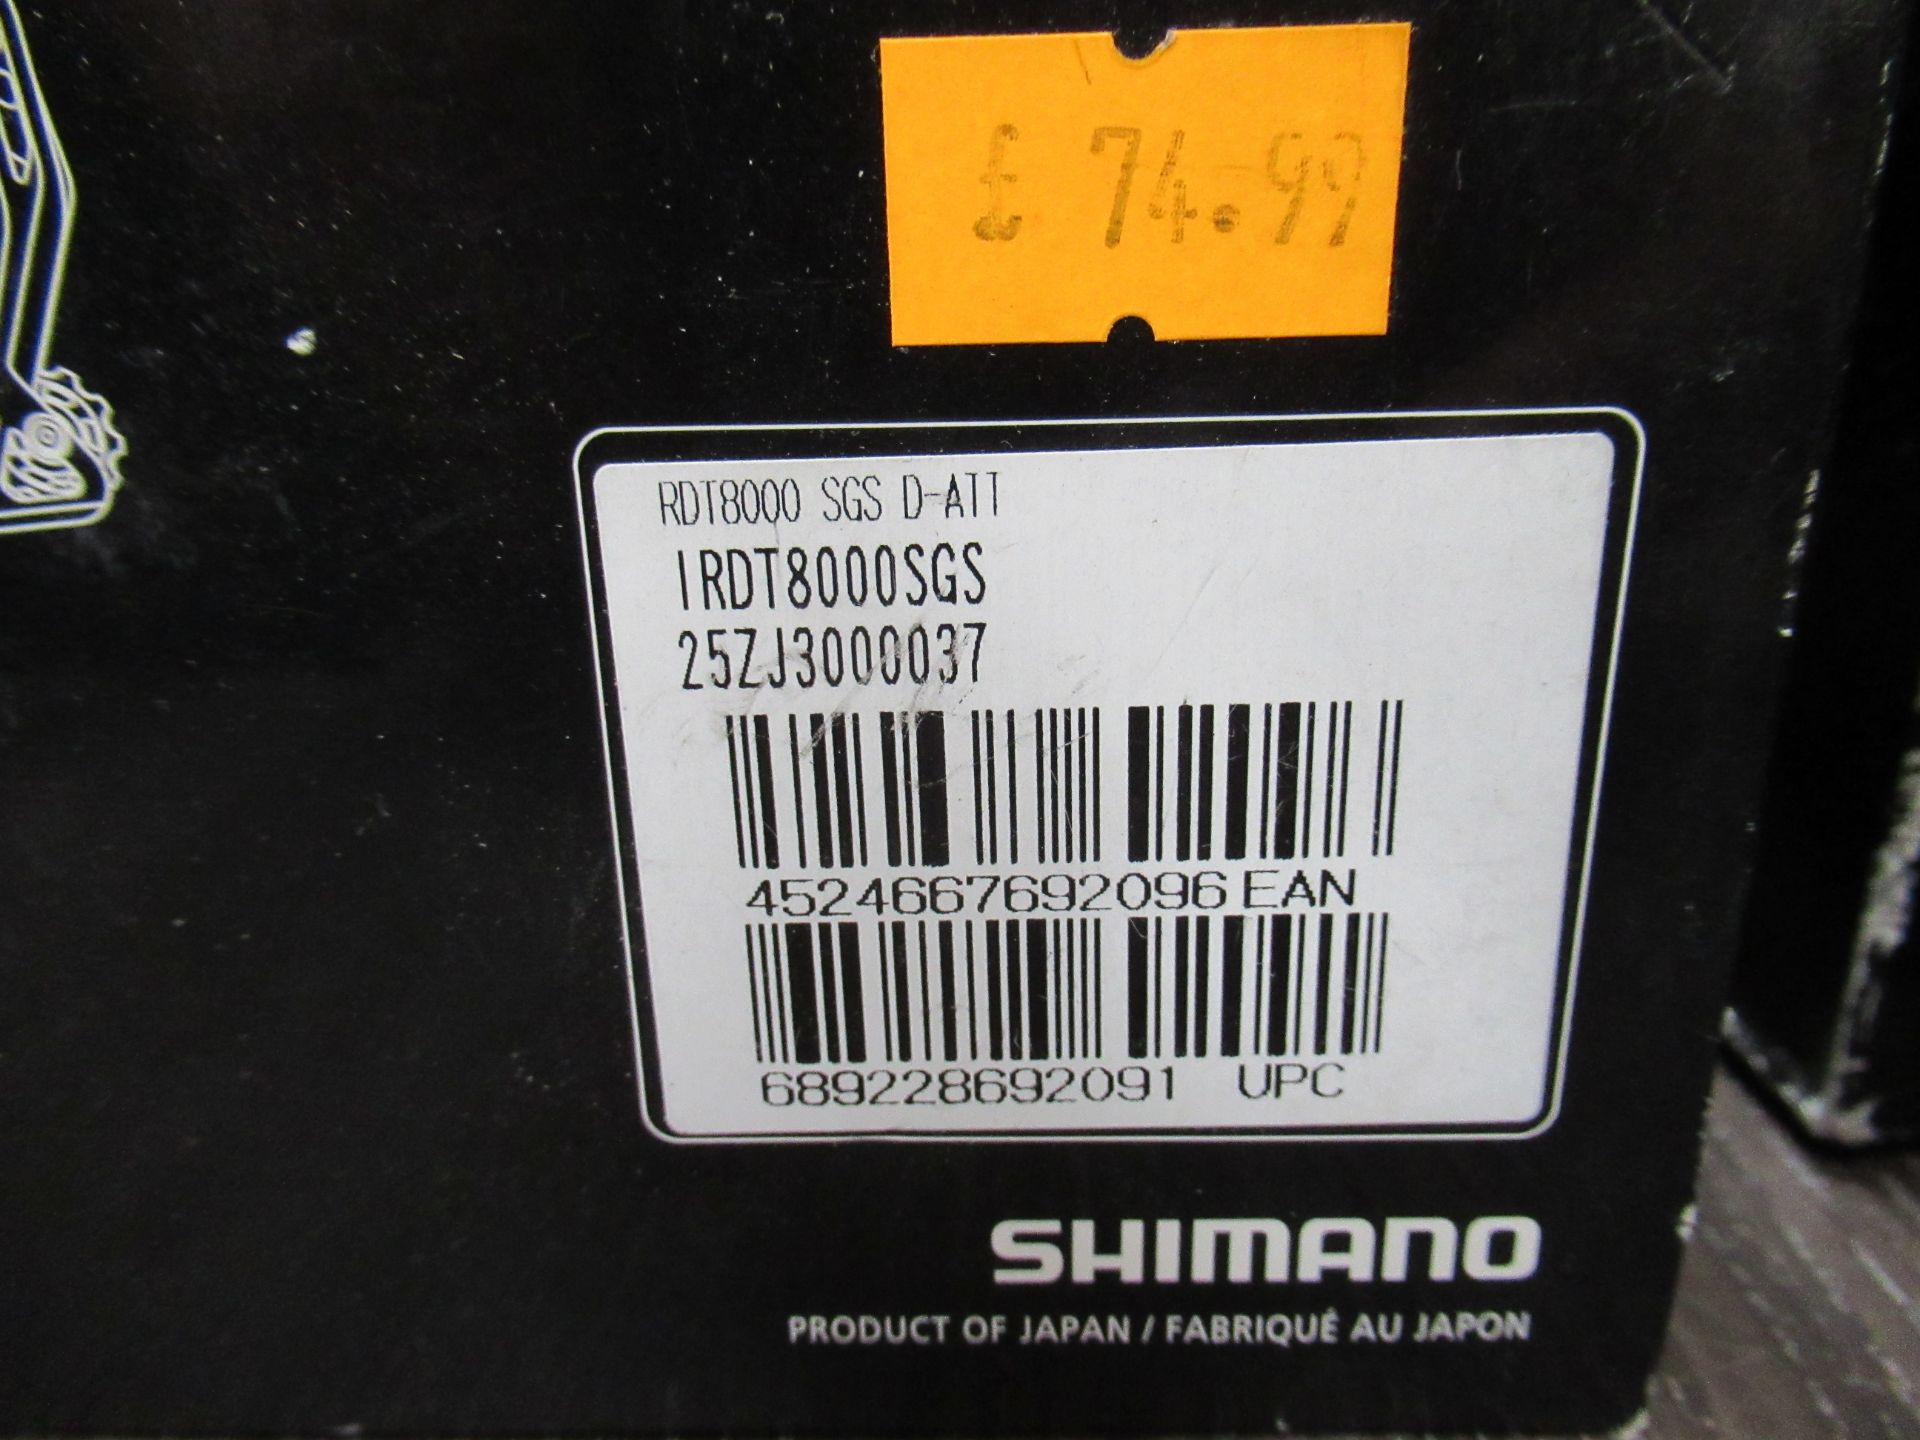 5 x Shimano Deore XT derailleurs to include models RD-T8000-SGS; FD-T8000-L-3; FD-T8000-H-3; RD-M781 - Image 4 of 6